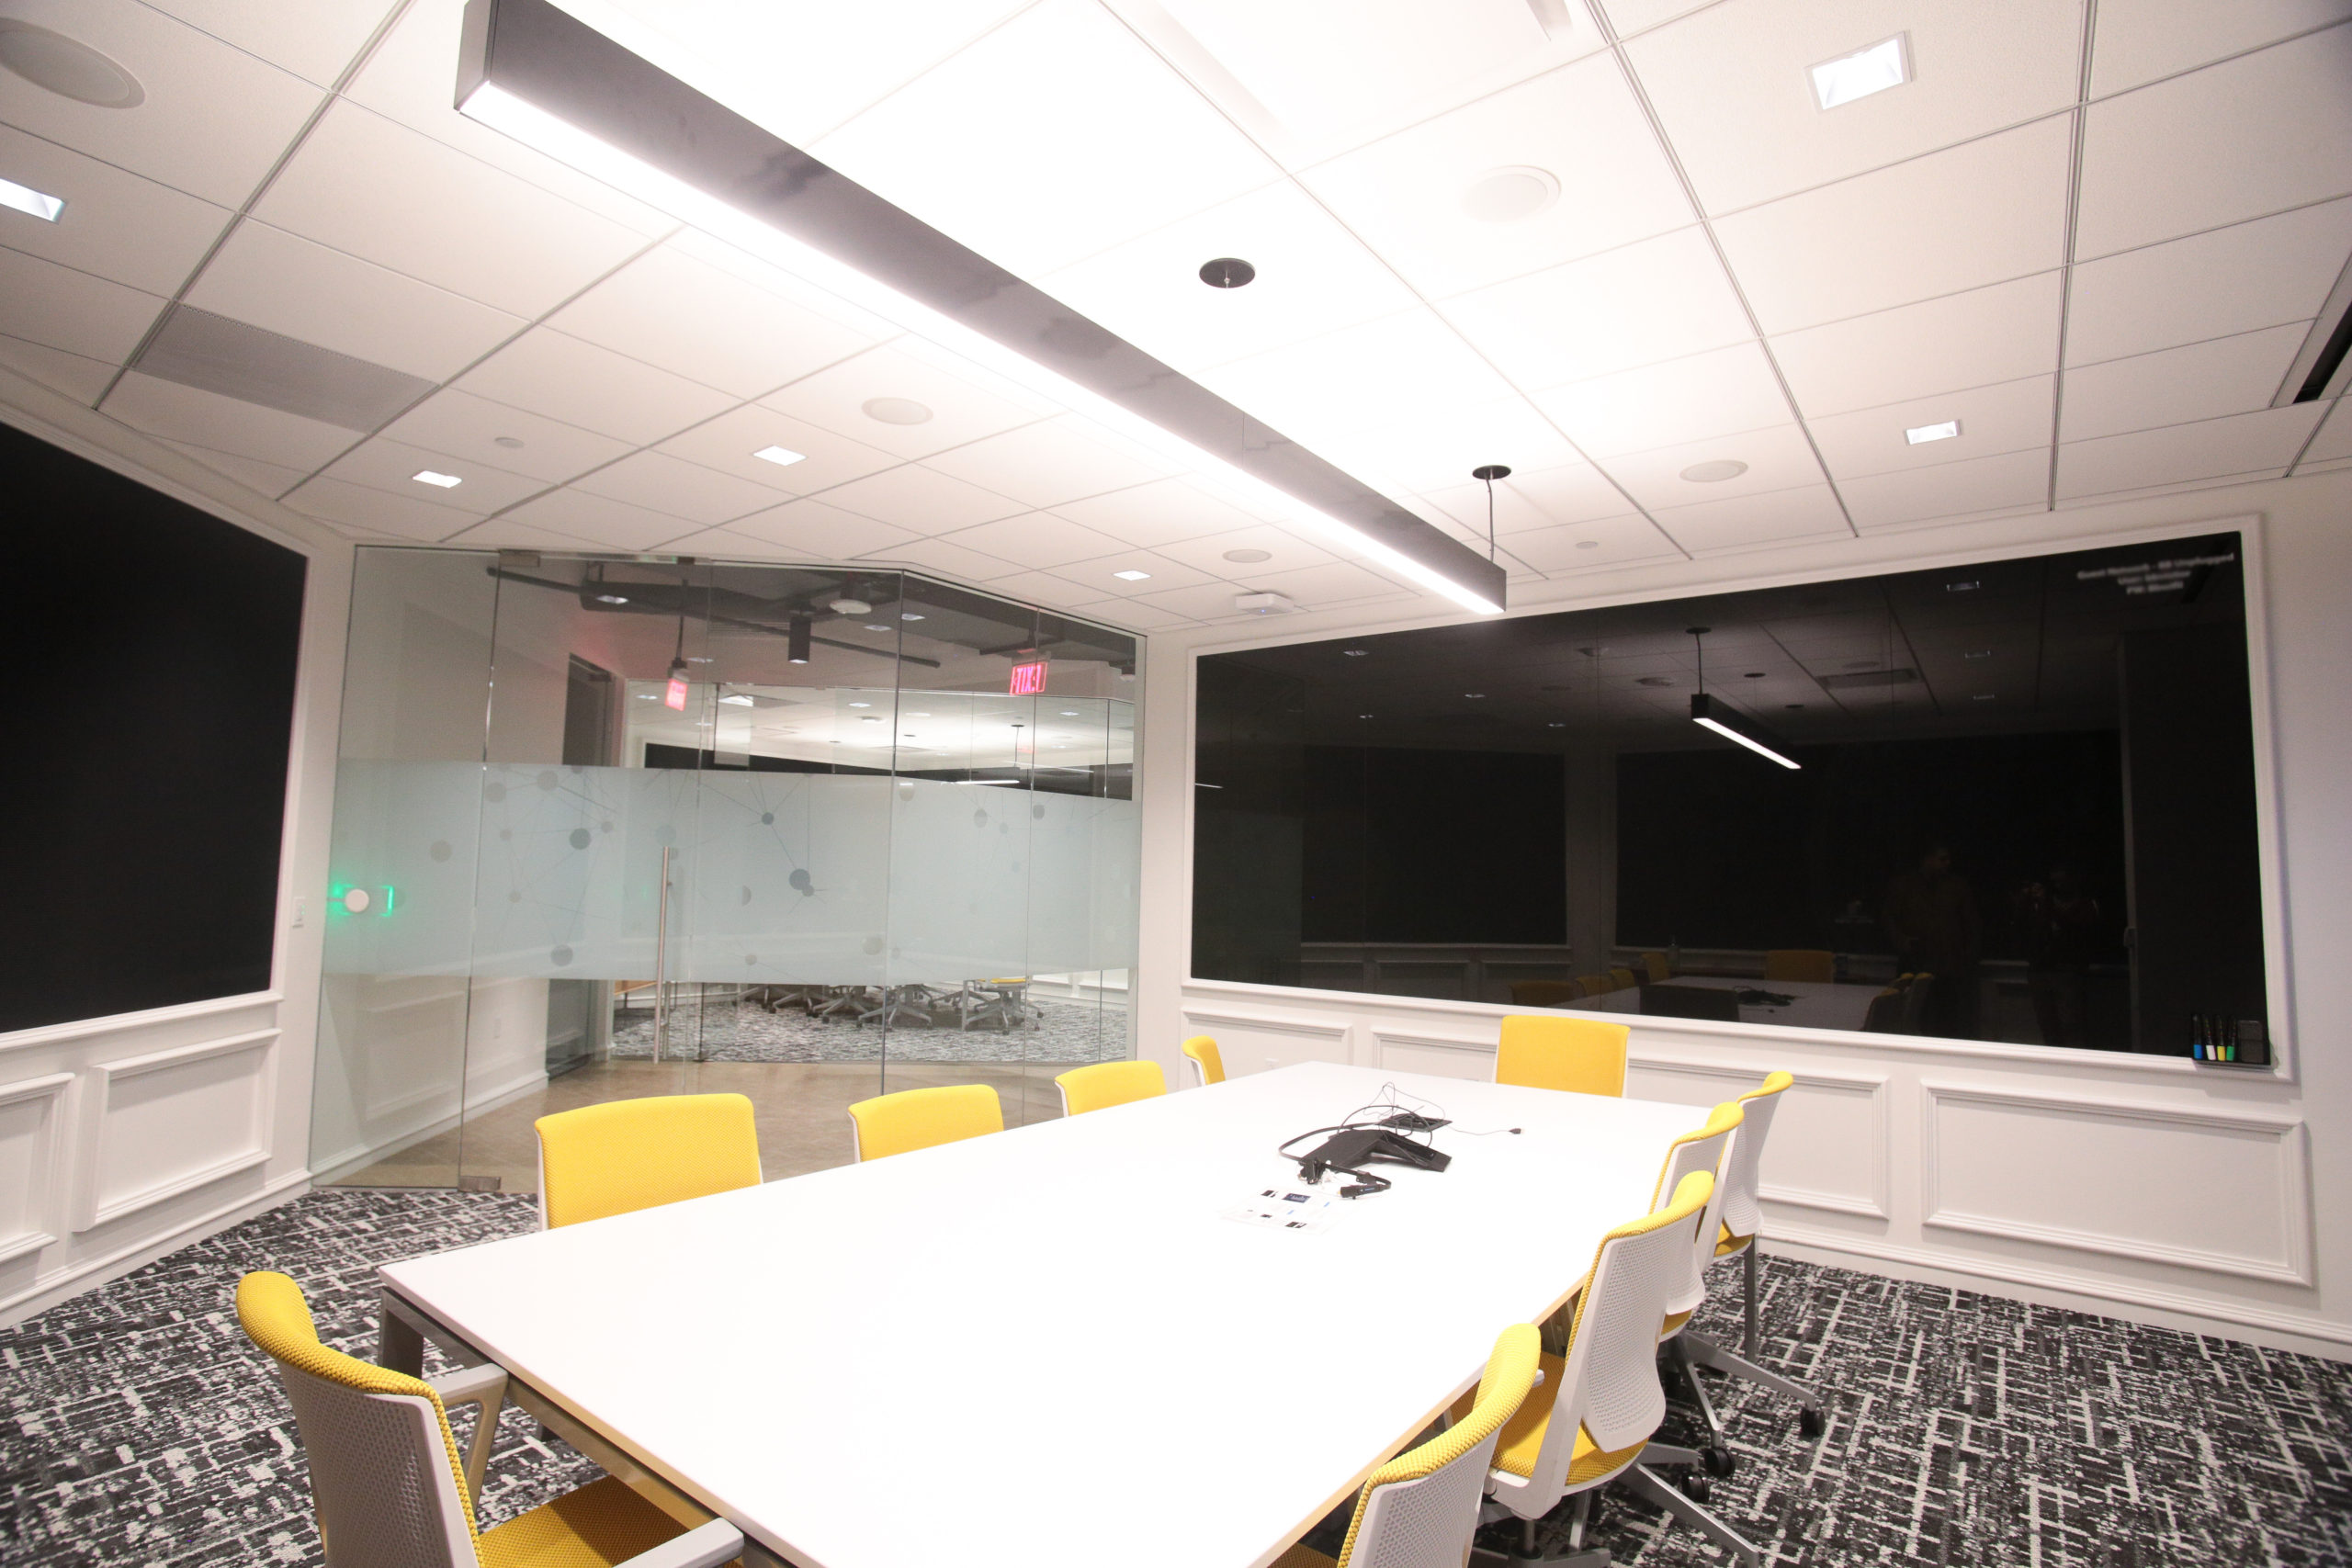 Conference room with glass walls and a back painted glass marker board.